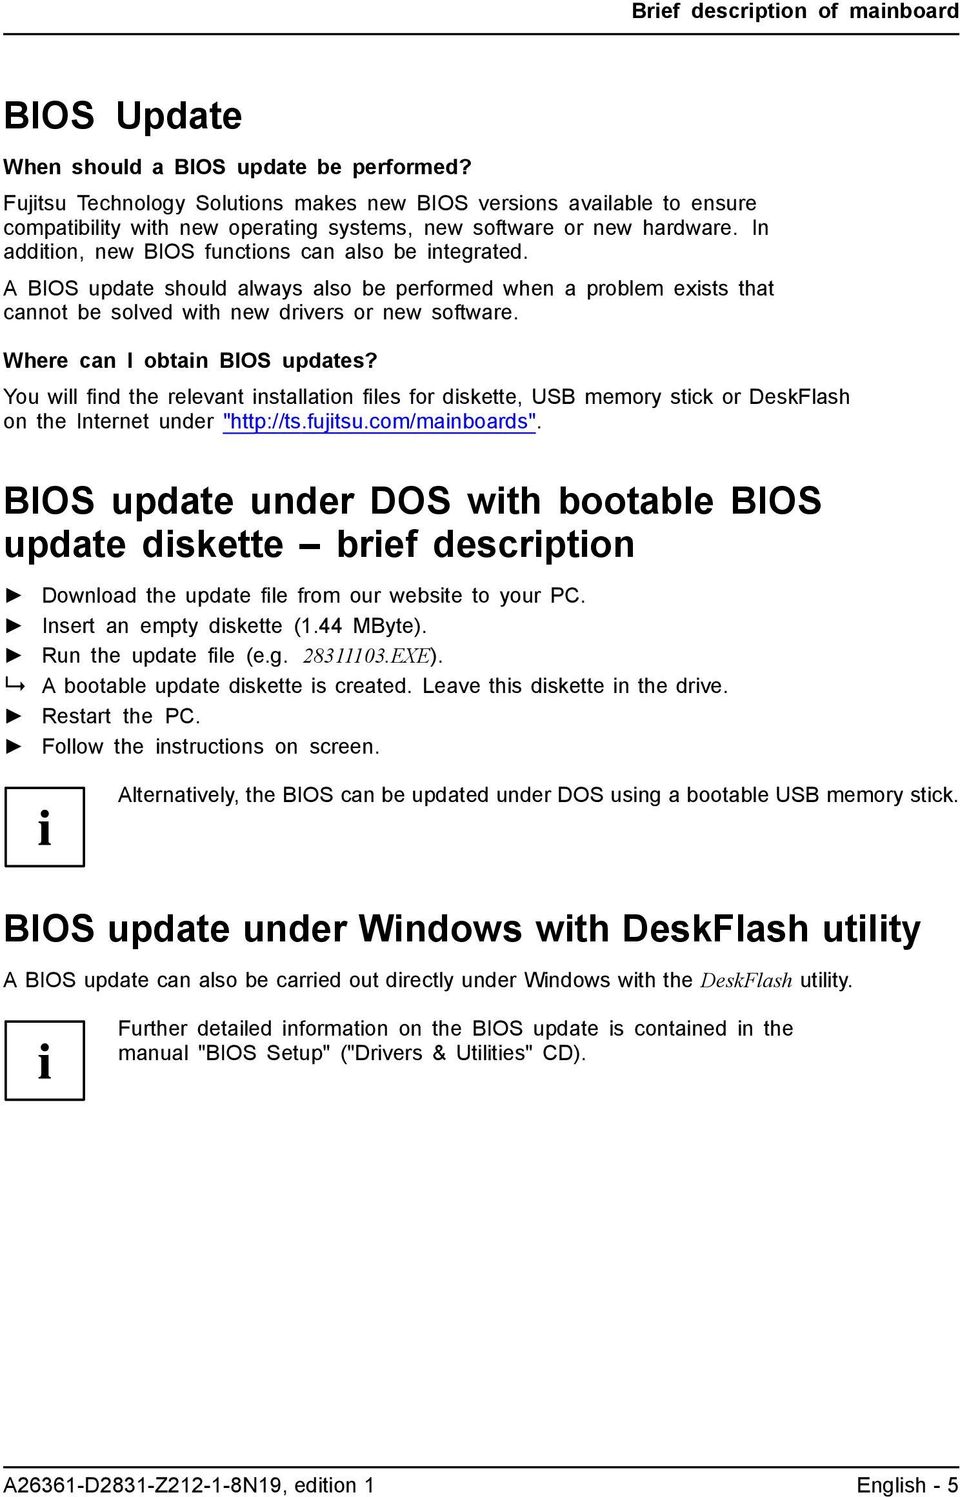 A BIOS update should always also be performed when a problem exists that cannot be solved with new drivers or new software. Where can I obtain BIOS updates?